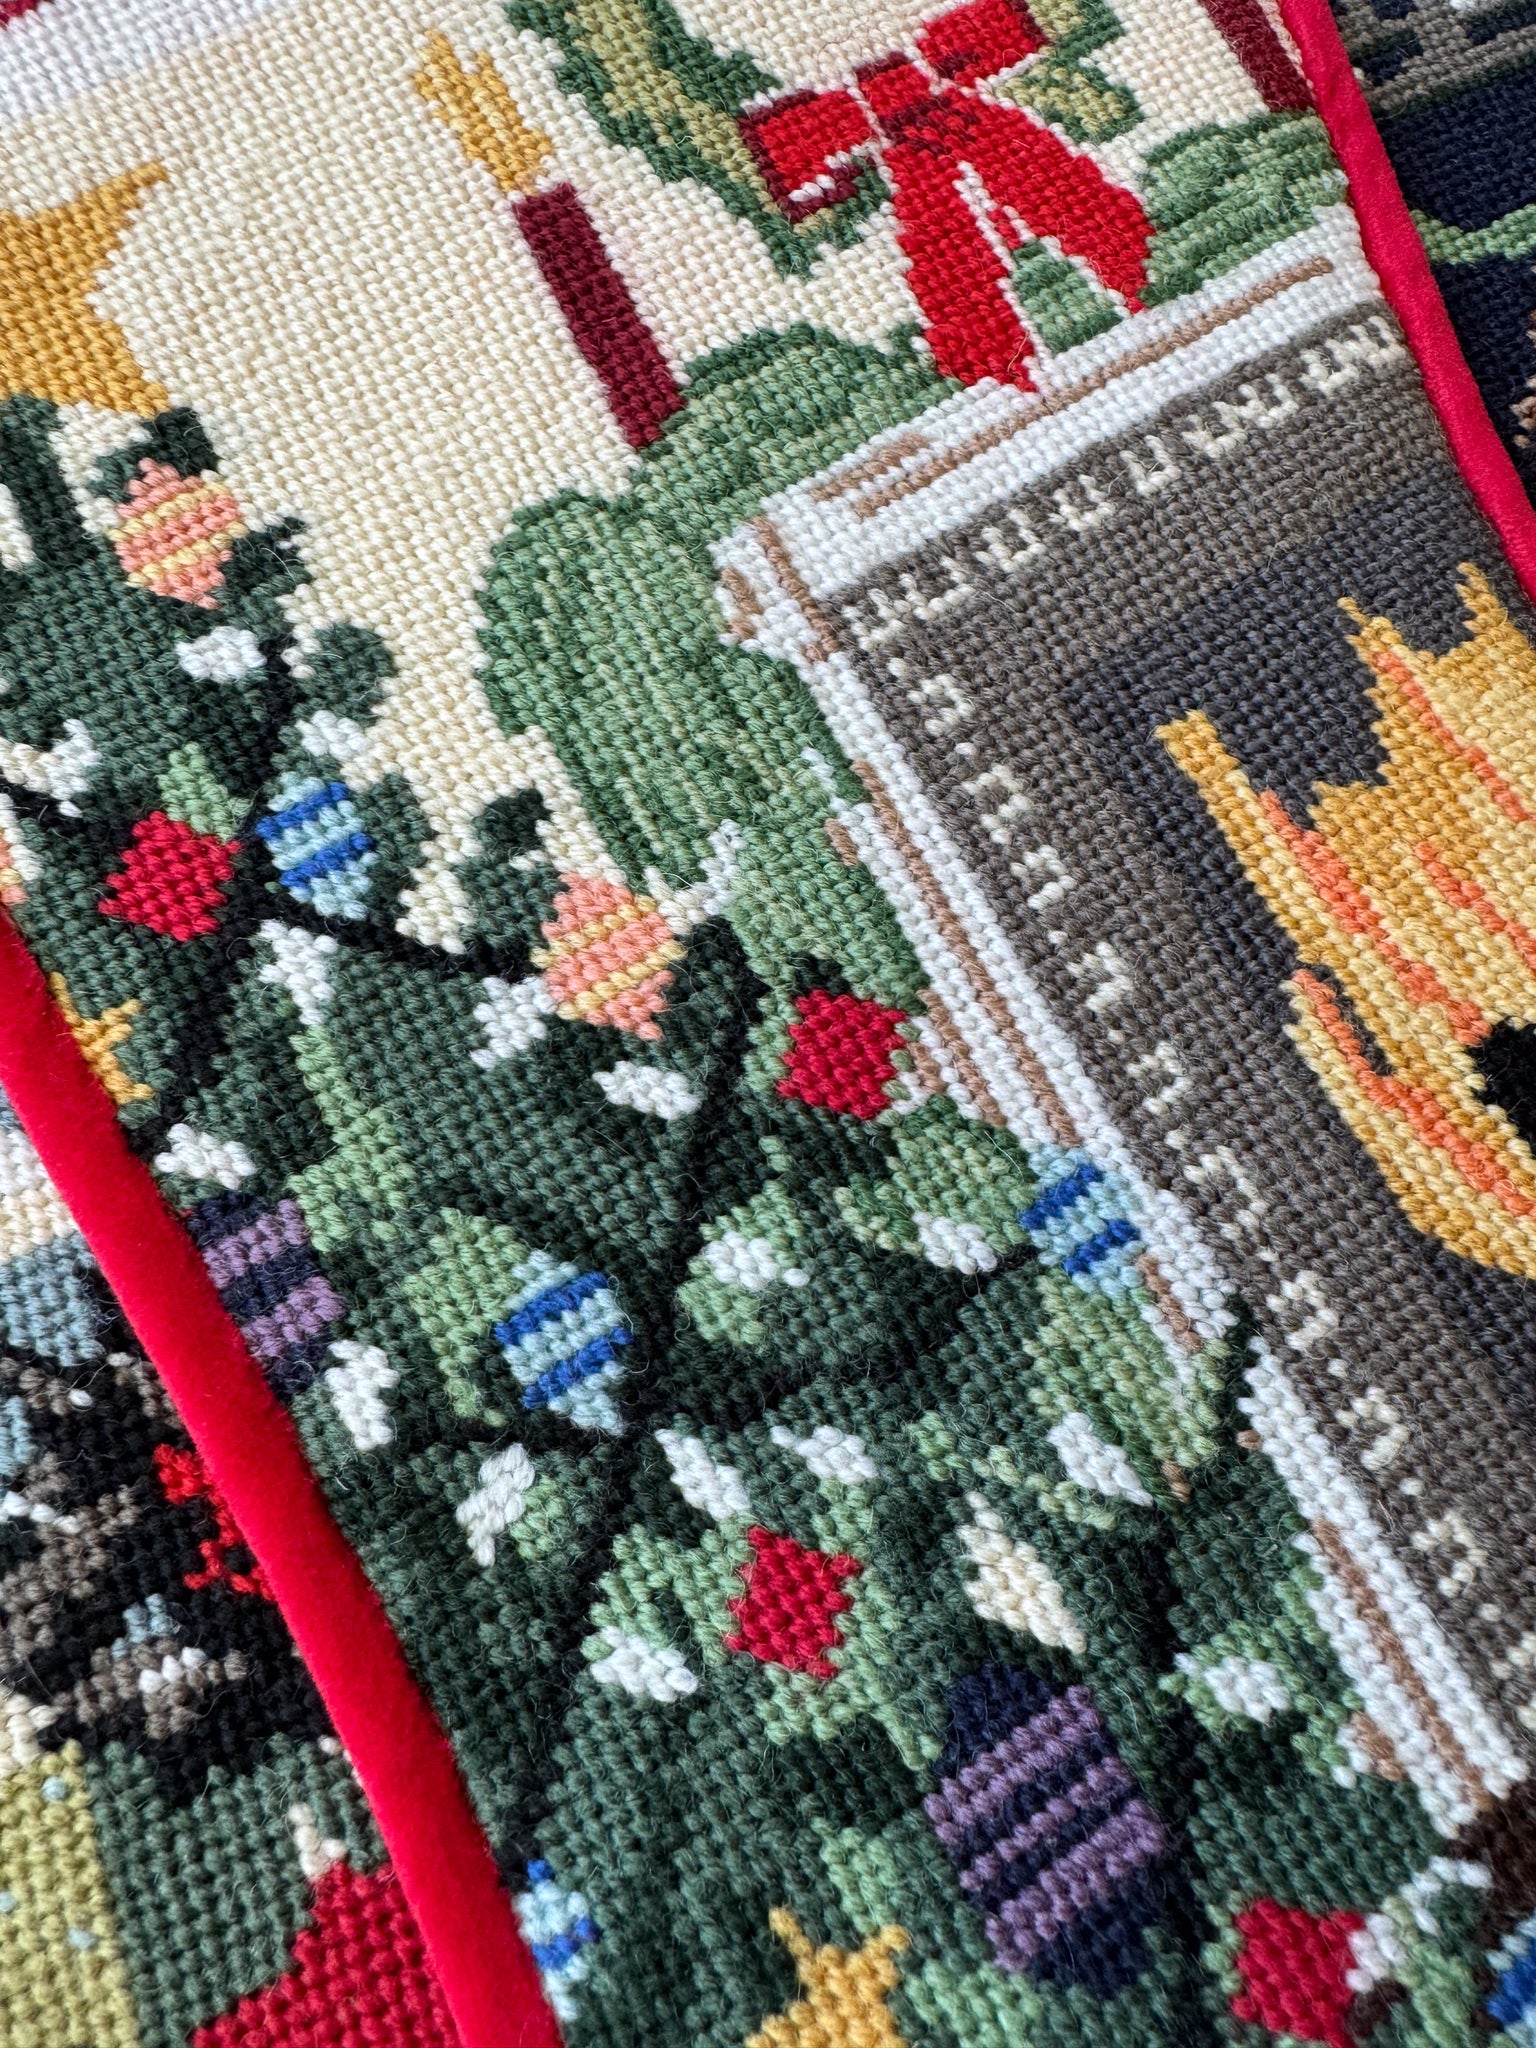 Stitched Stocking - Cozy Hearth